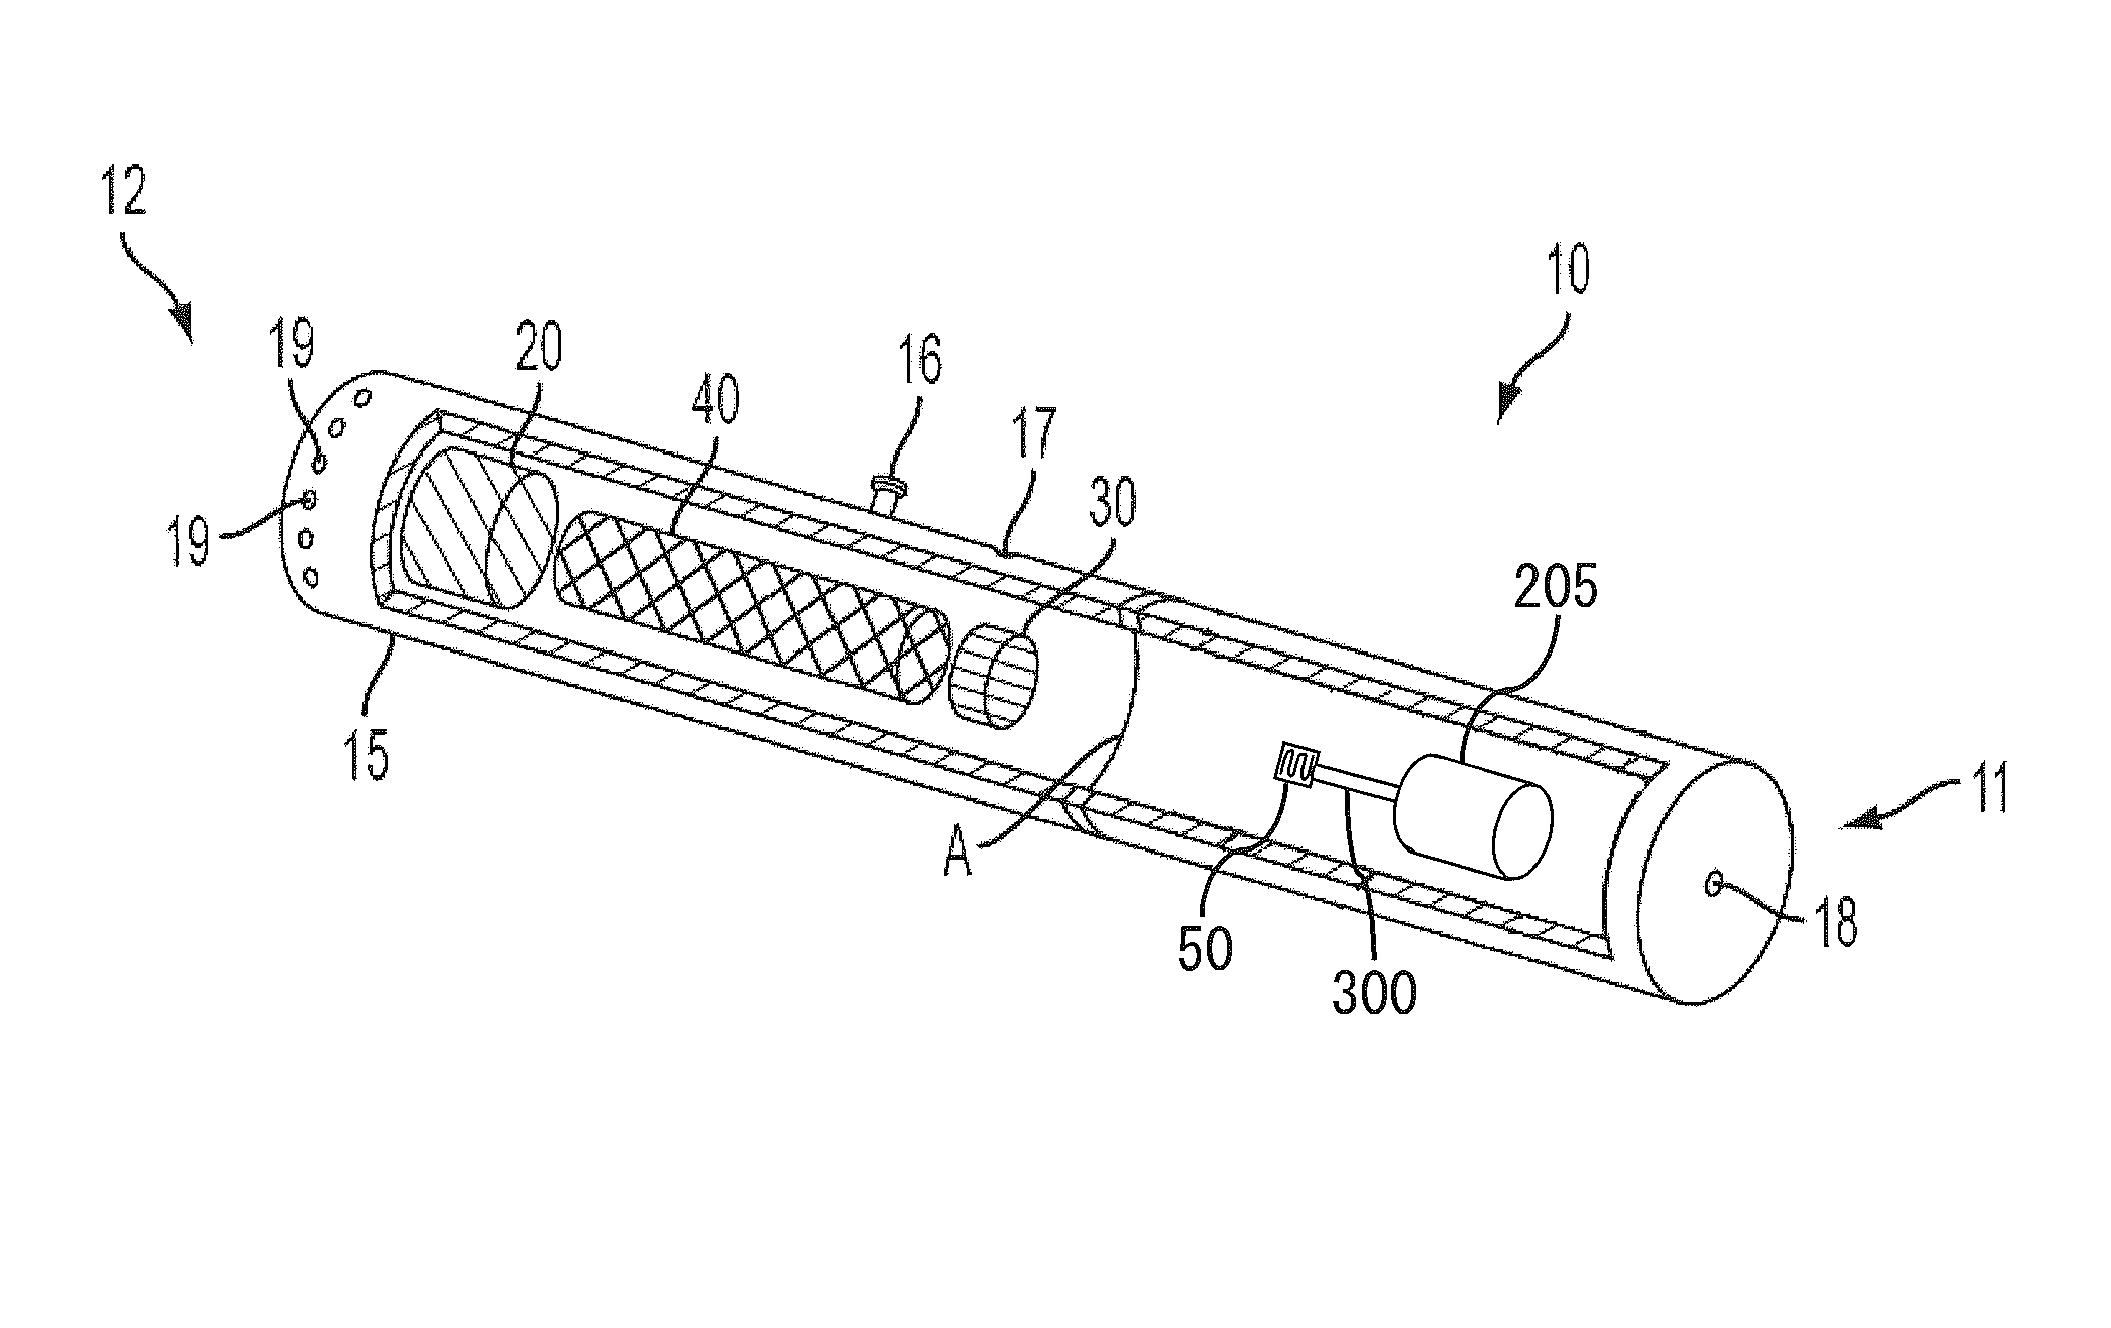 Electronic smoking article comprising one or more microheaters